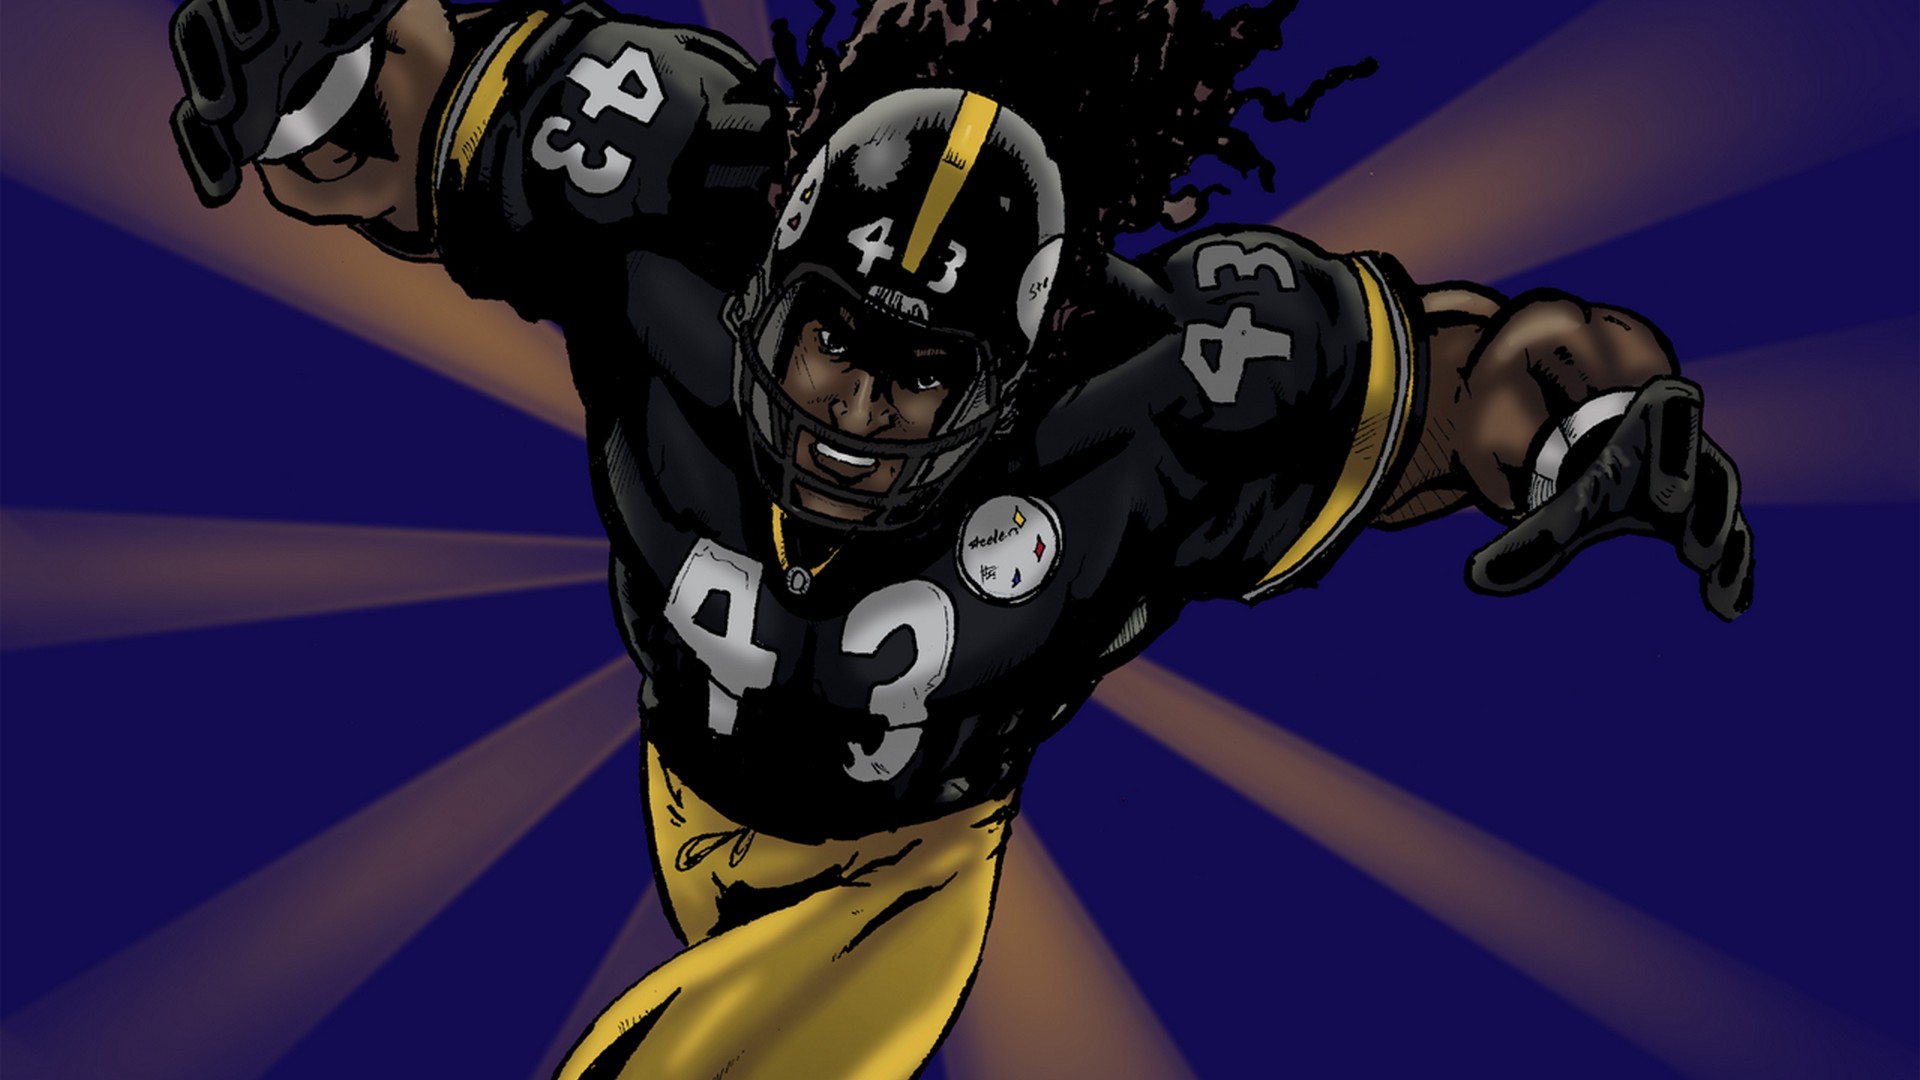 Wallpapers HD Steelers Football With Resolution 1920X1080 pixel. You can make this wallpaper for your Mac or Windows Desktop Background, iPhone, Android or Tablet and another Smartphone device for free